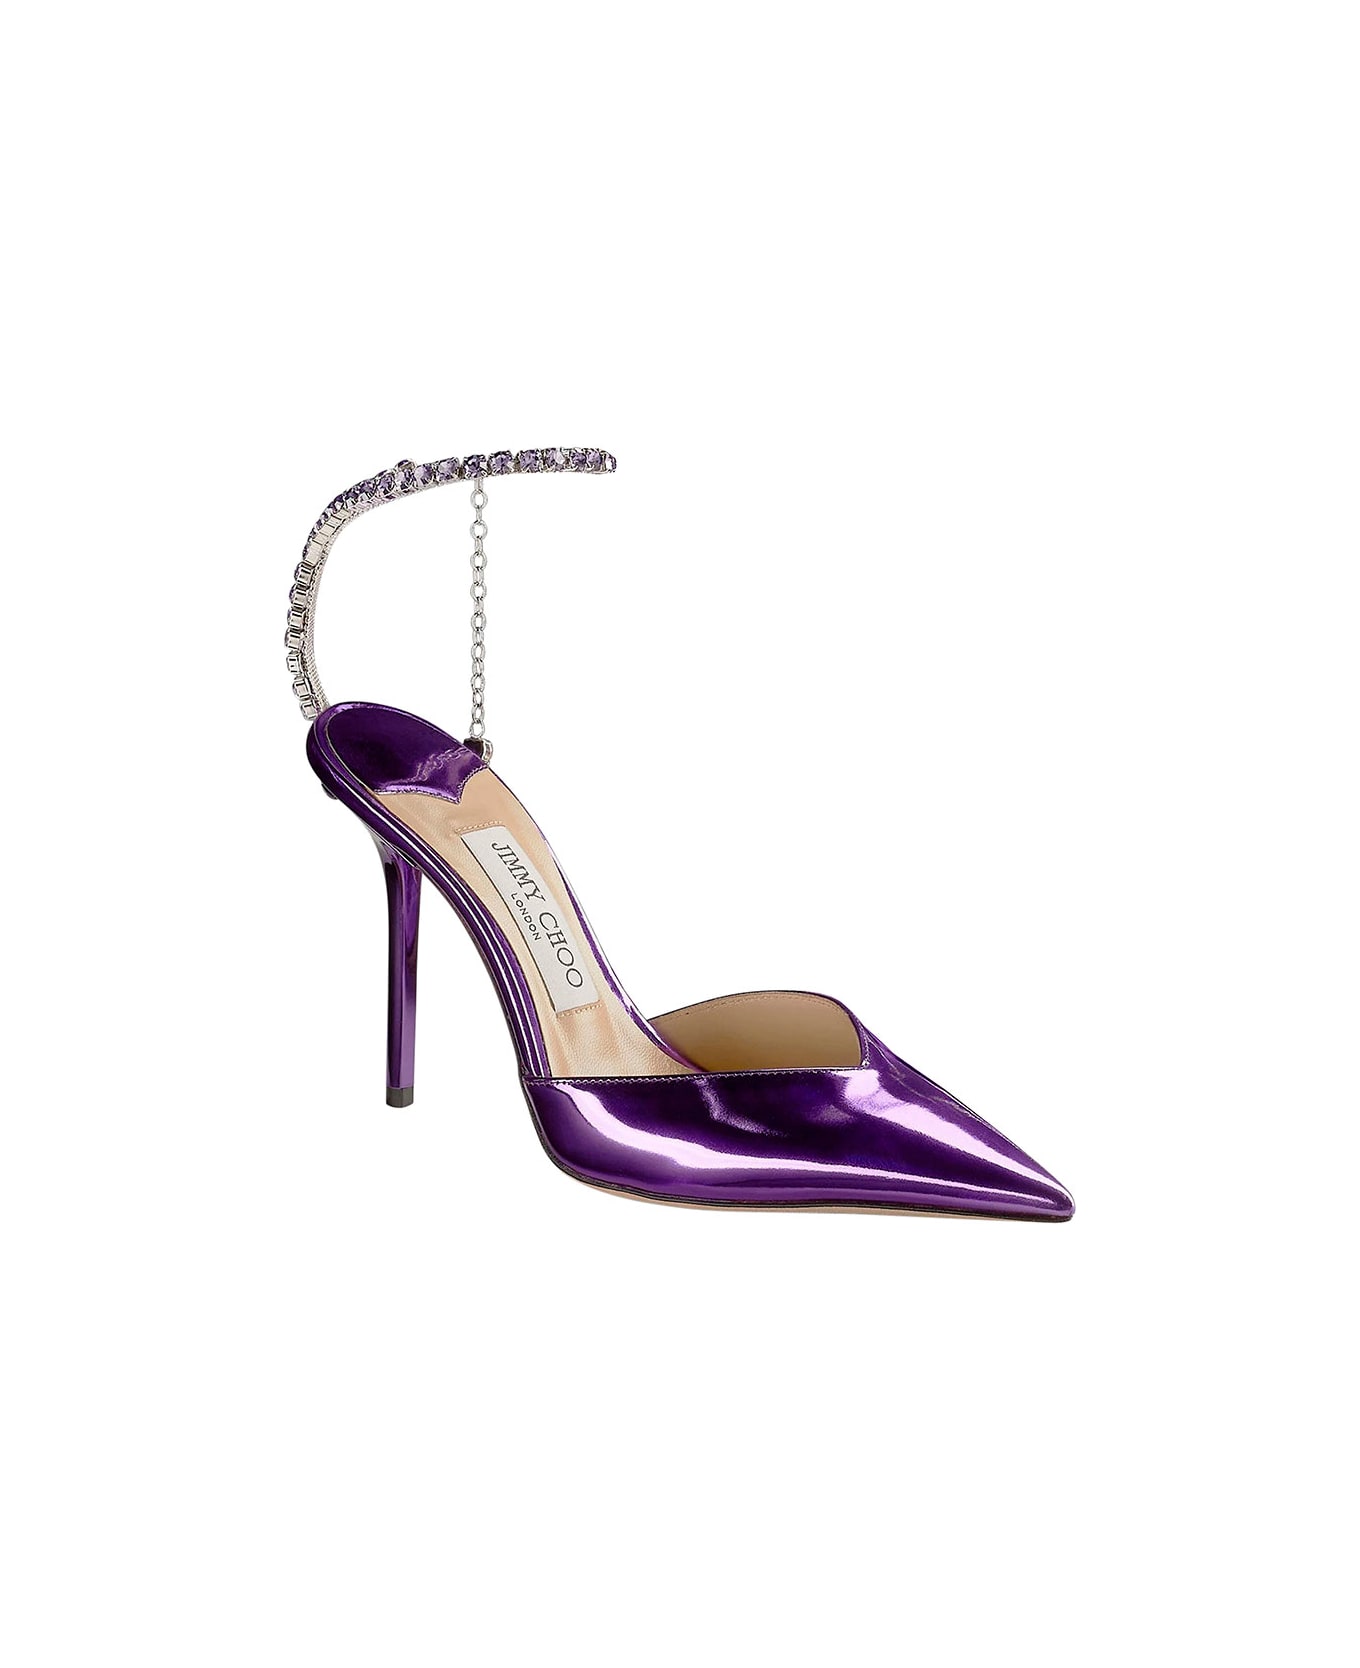 Jimmy Choo 'saeda' Purple Pointed And Closed Toe Sandals With Rhinestone Chain In Metallic Leather Woman - Violet